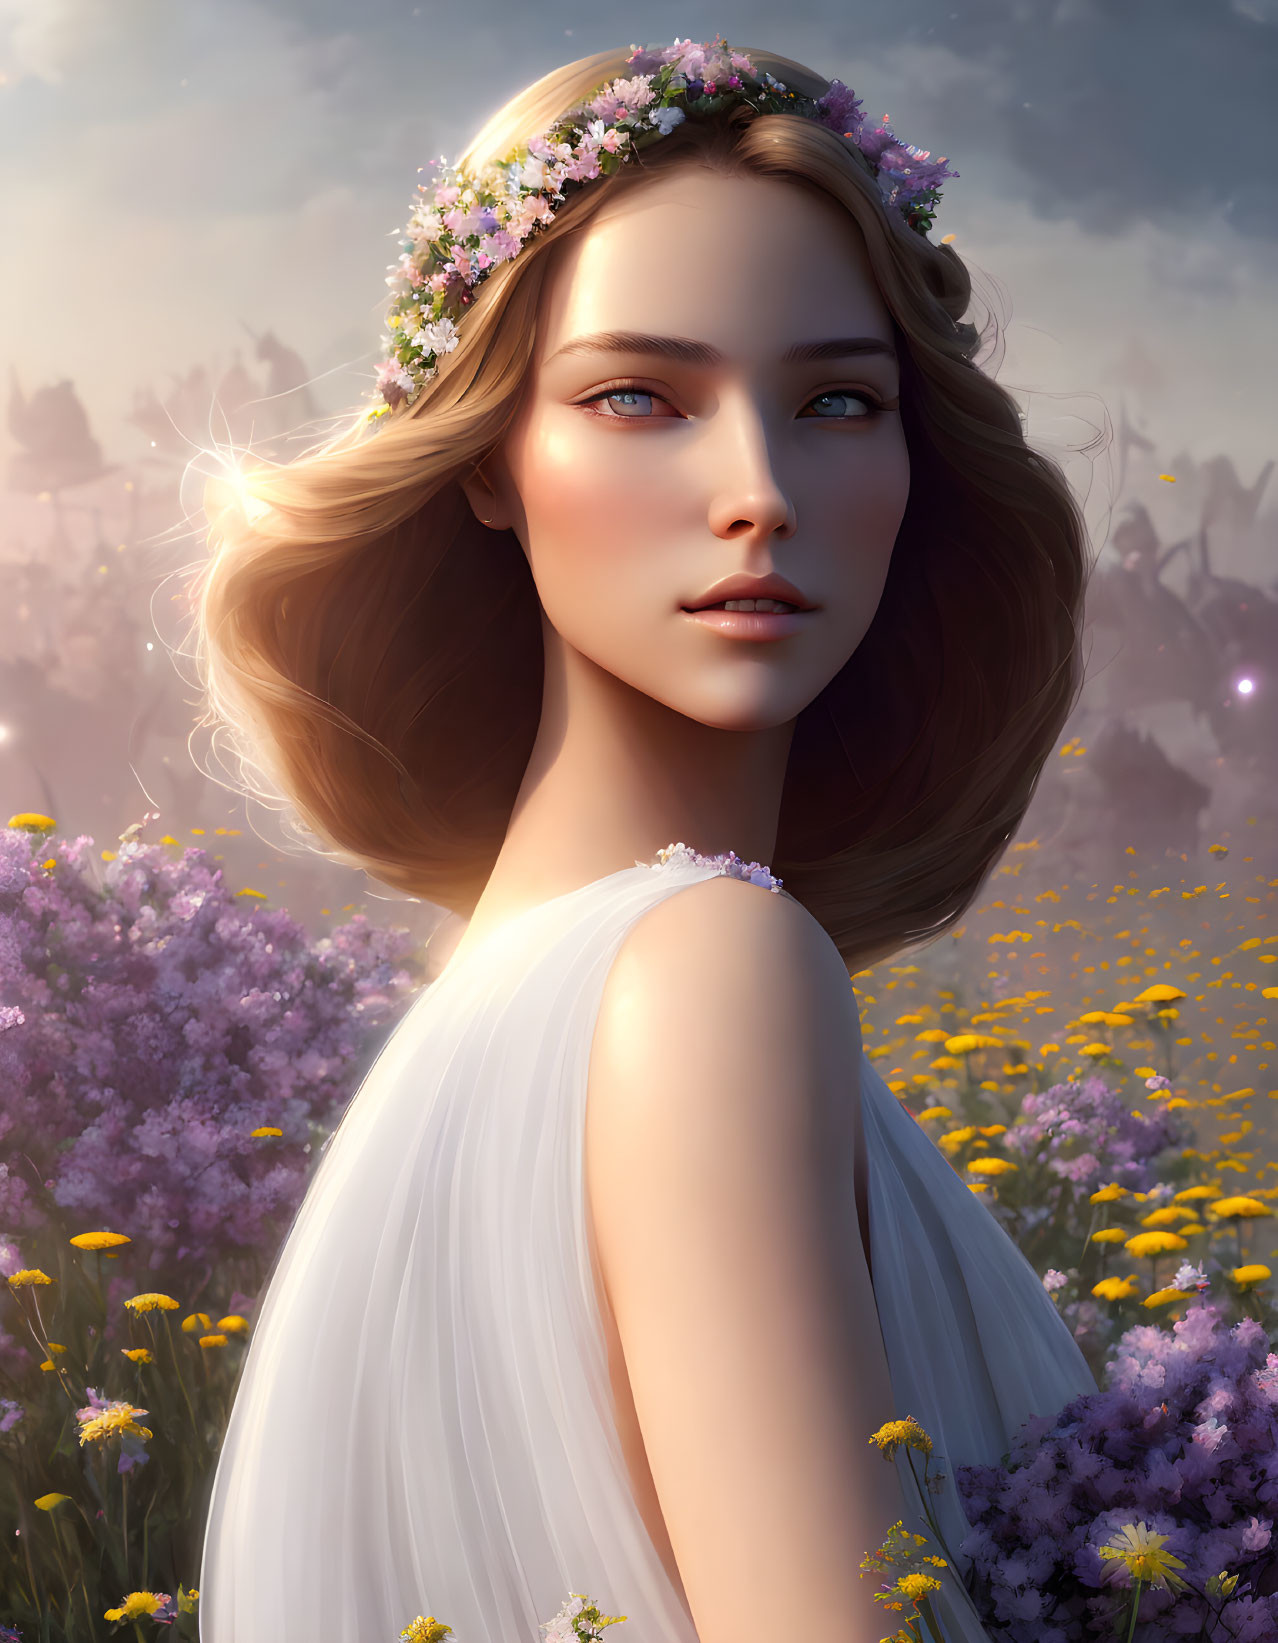 Woman in floral crown and white dress in blooming meadow with warm glow